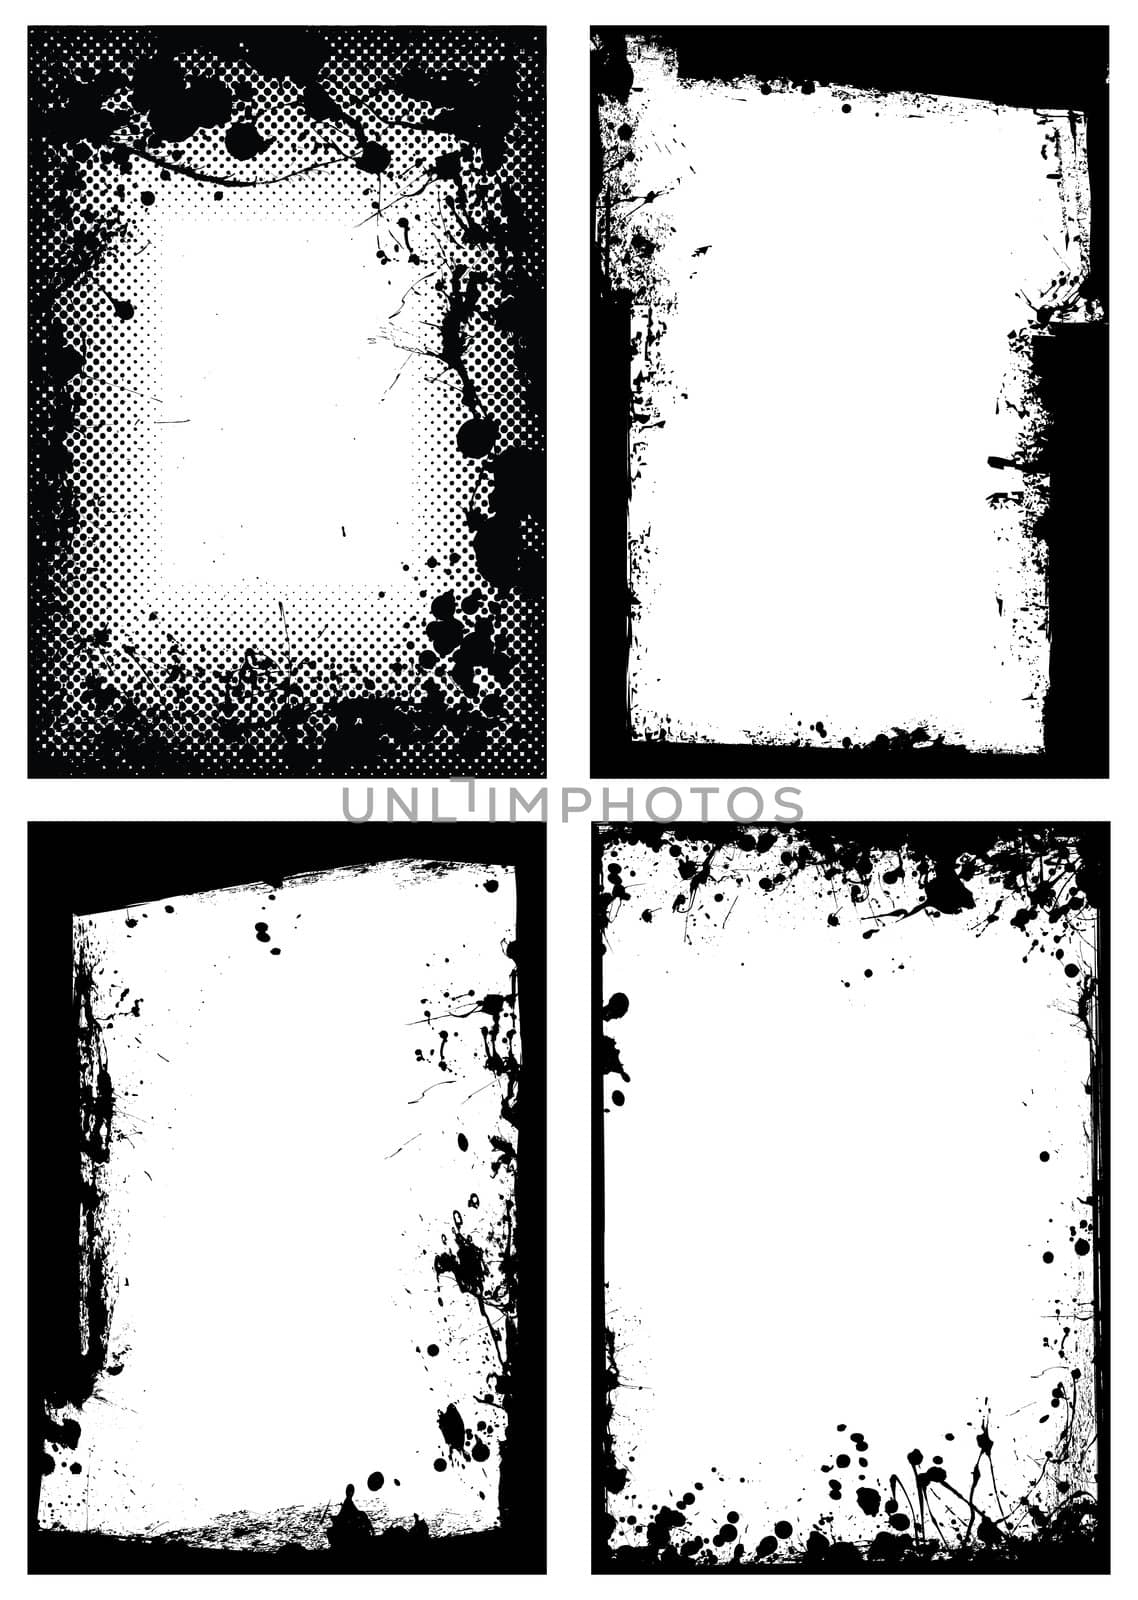 Black ink grunge border with white background and splat effect